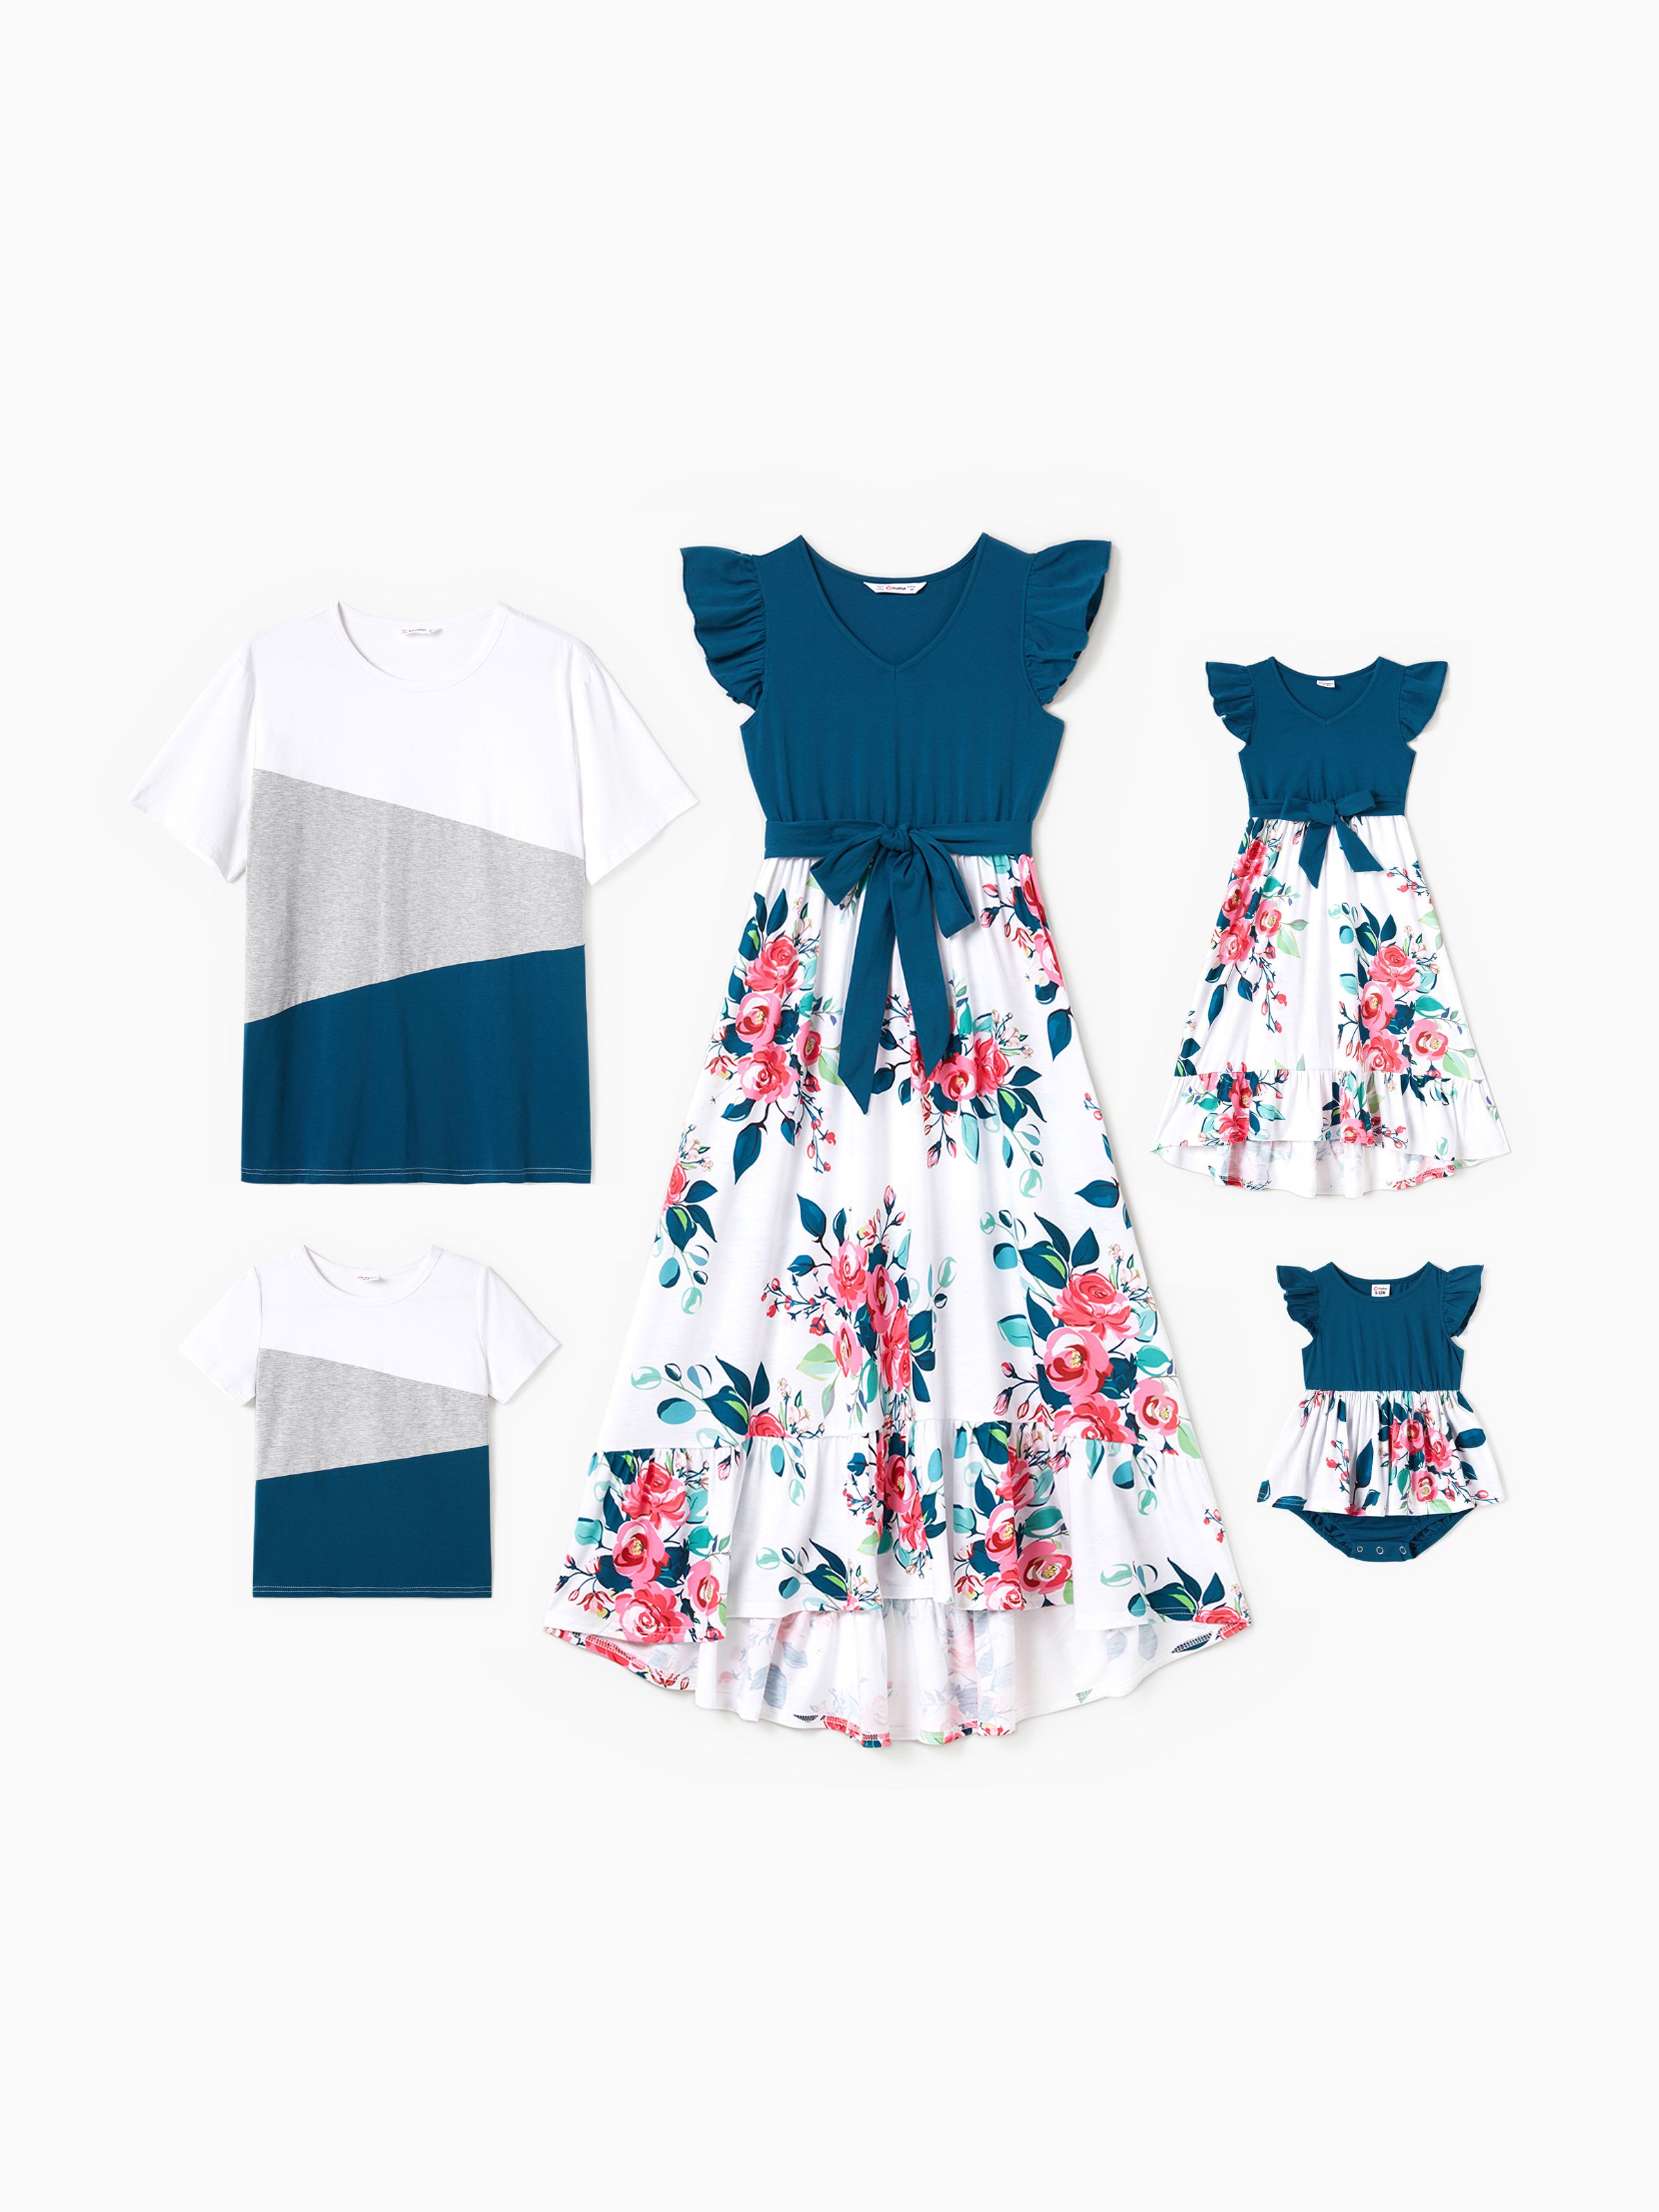 Family Matching Solid Short-sleeve Splicing Floral Print Dresses and Colorblock T-shirts Sets